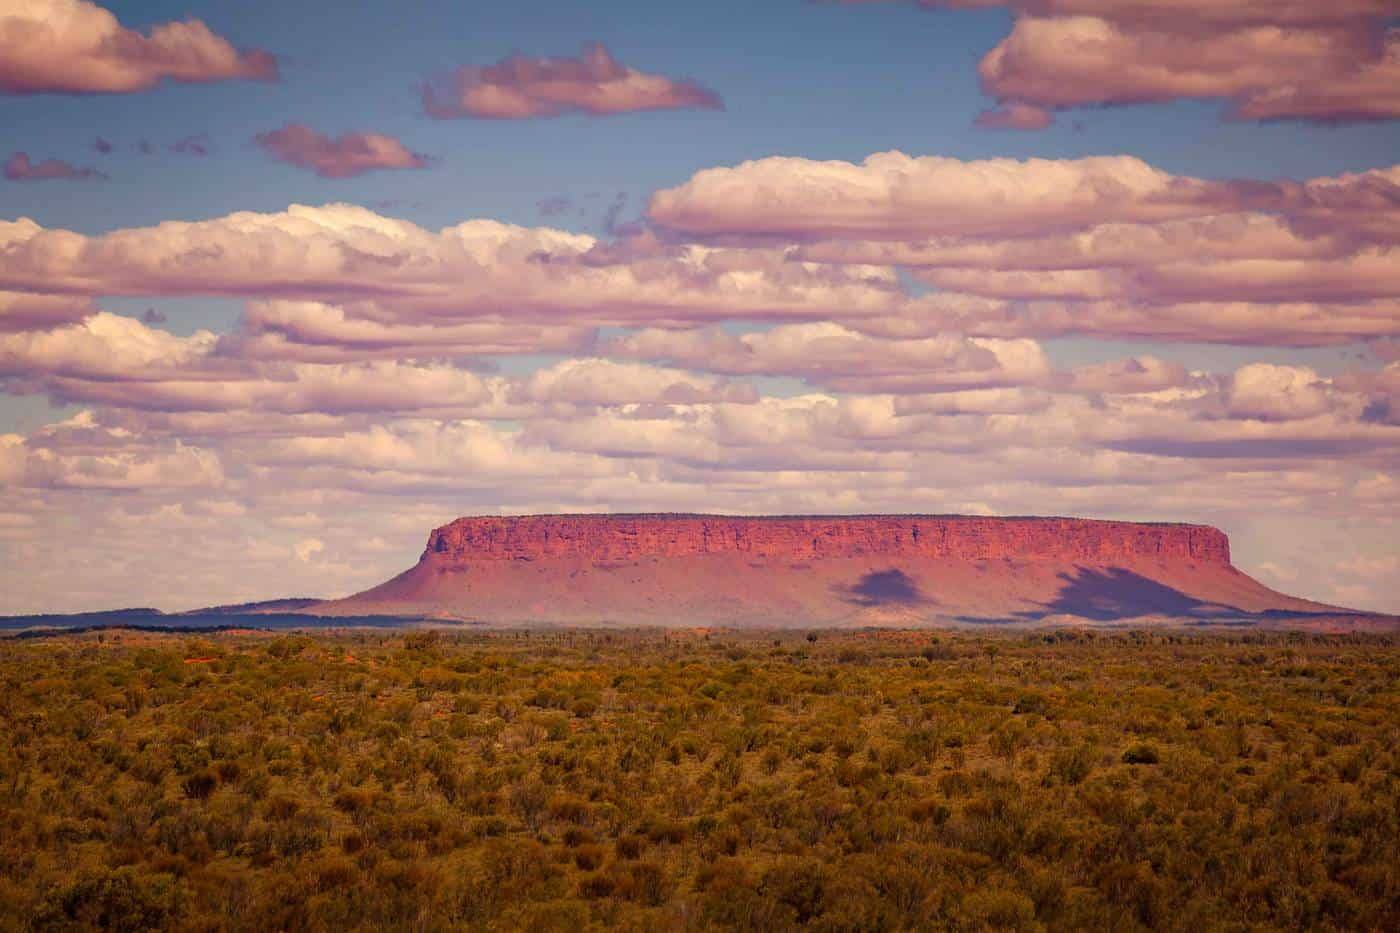 THE RED CENTRE